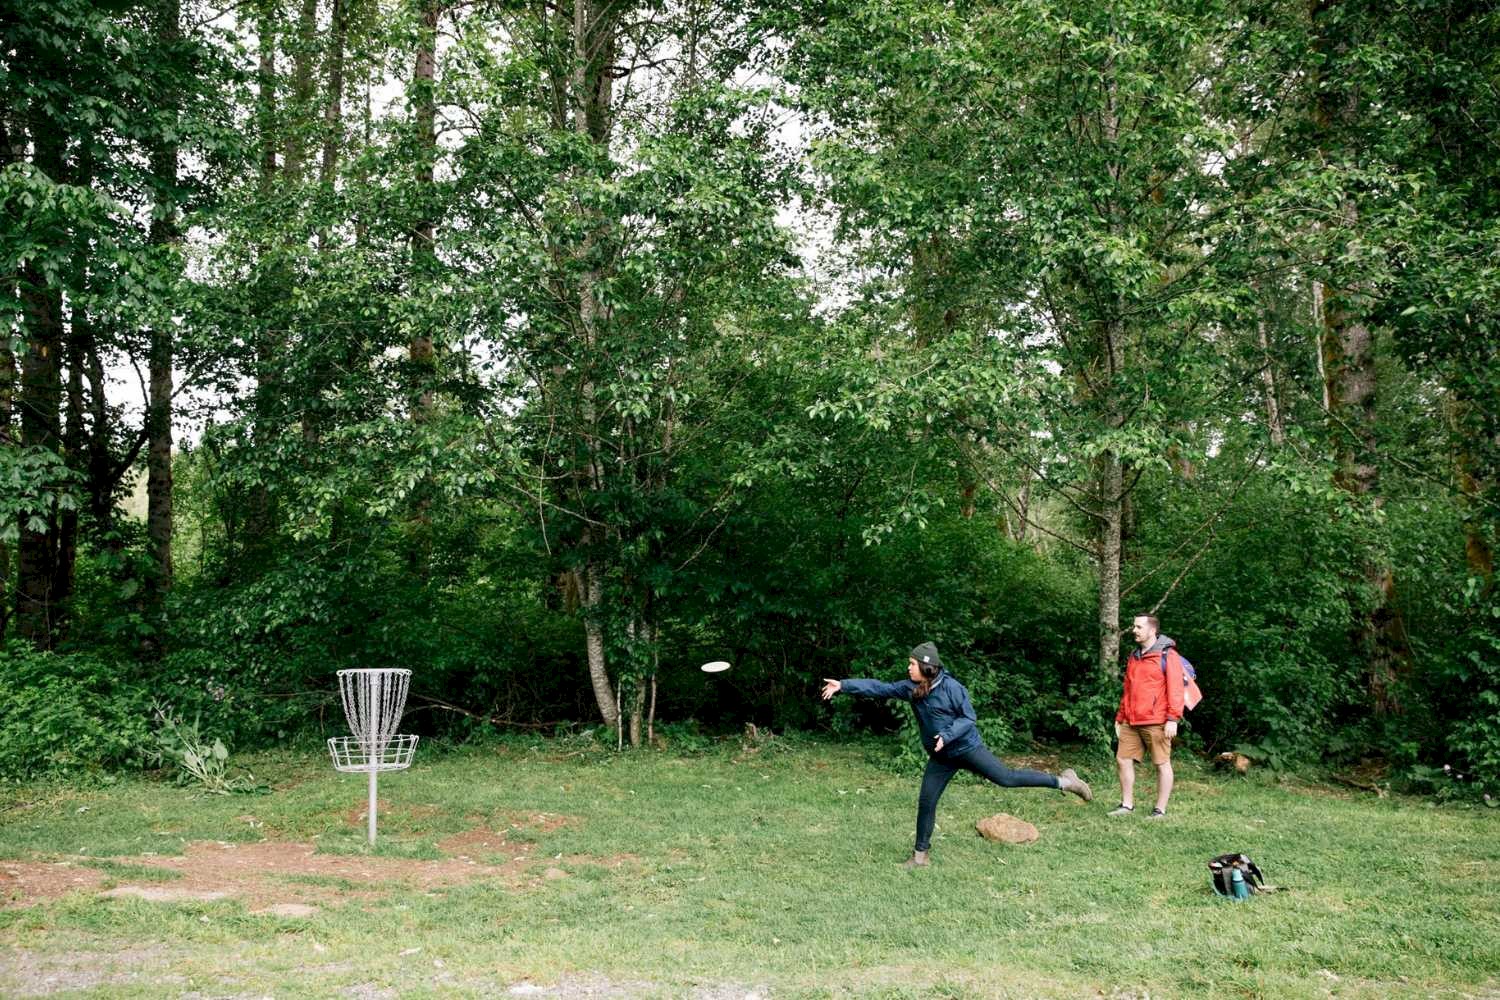 Woman throwing a disc playing disc golf